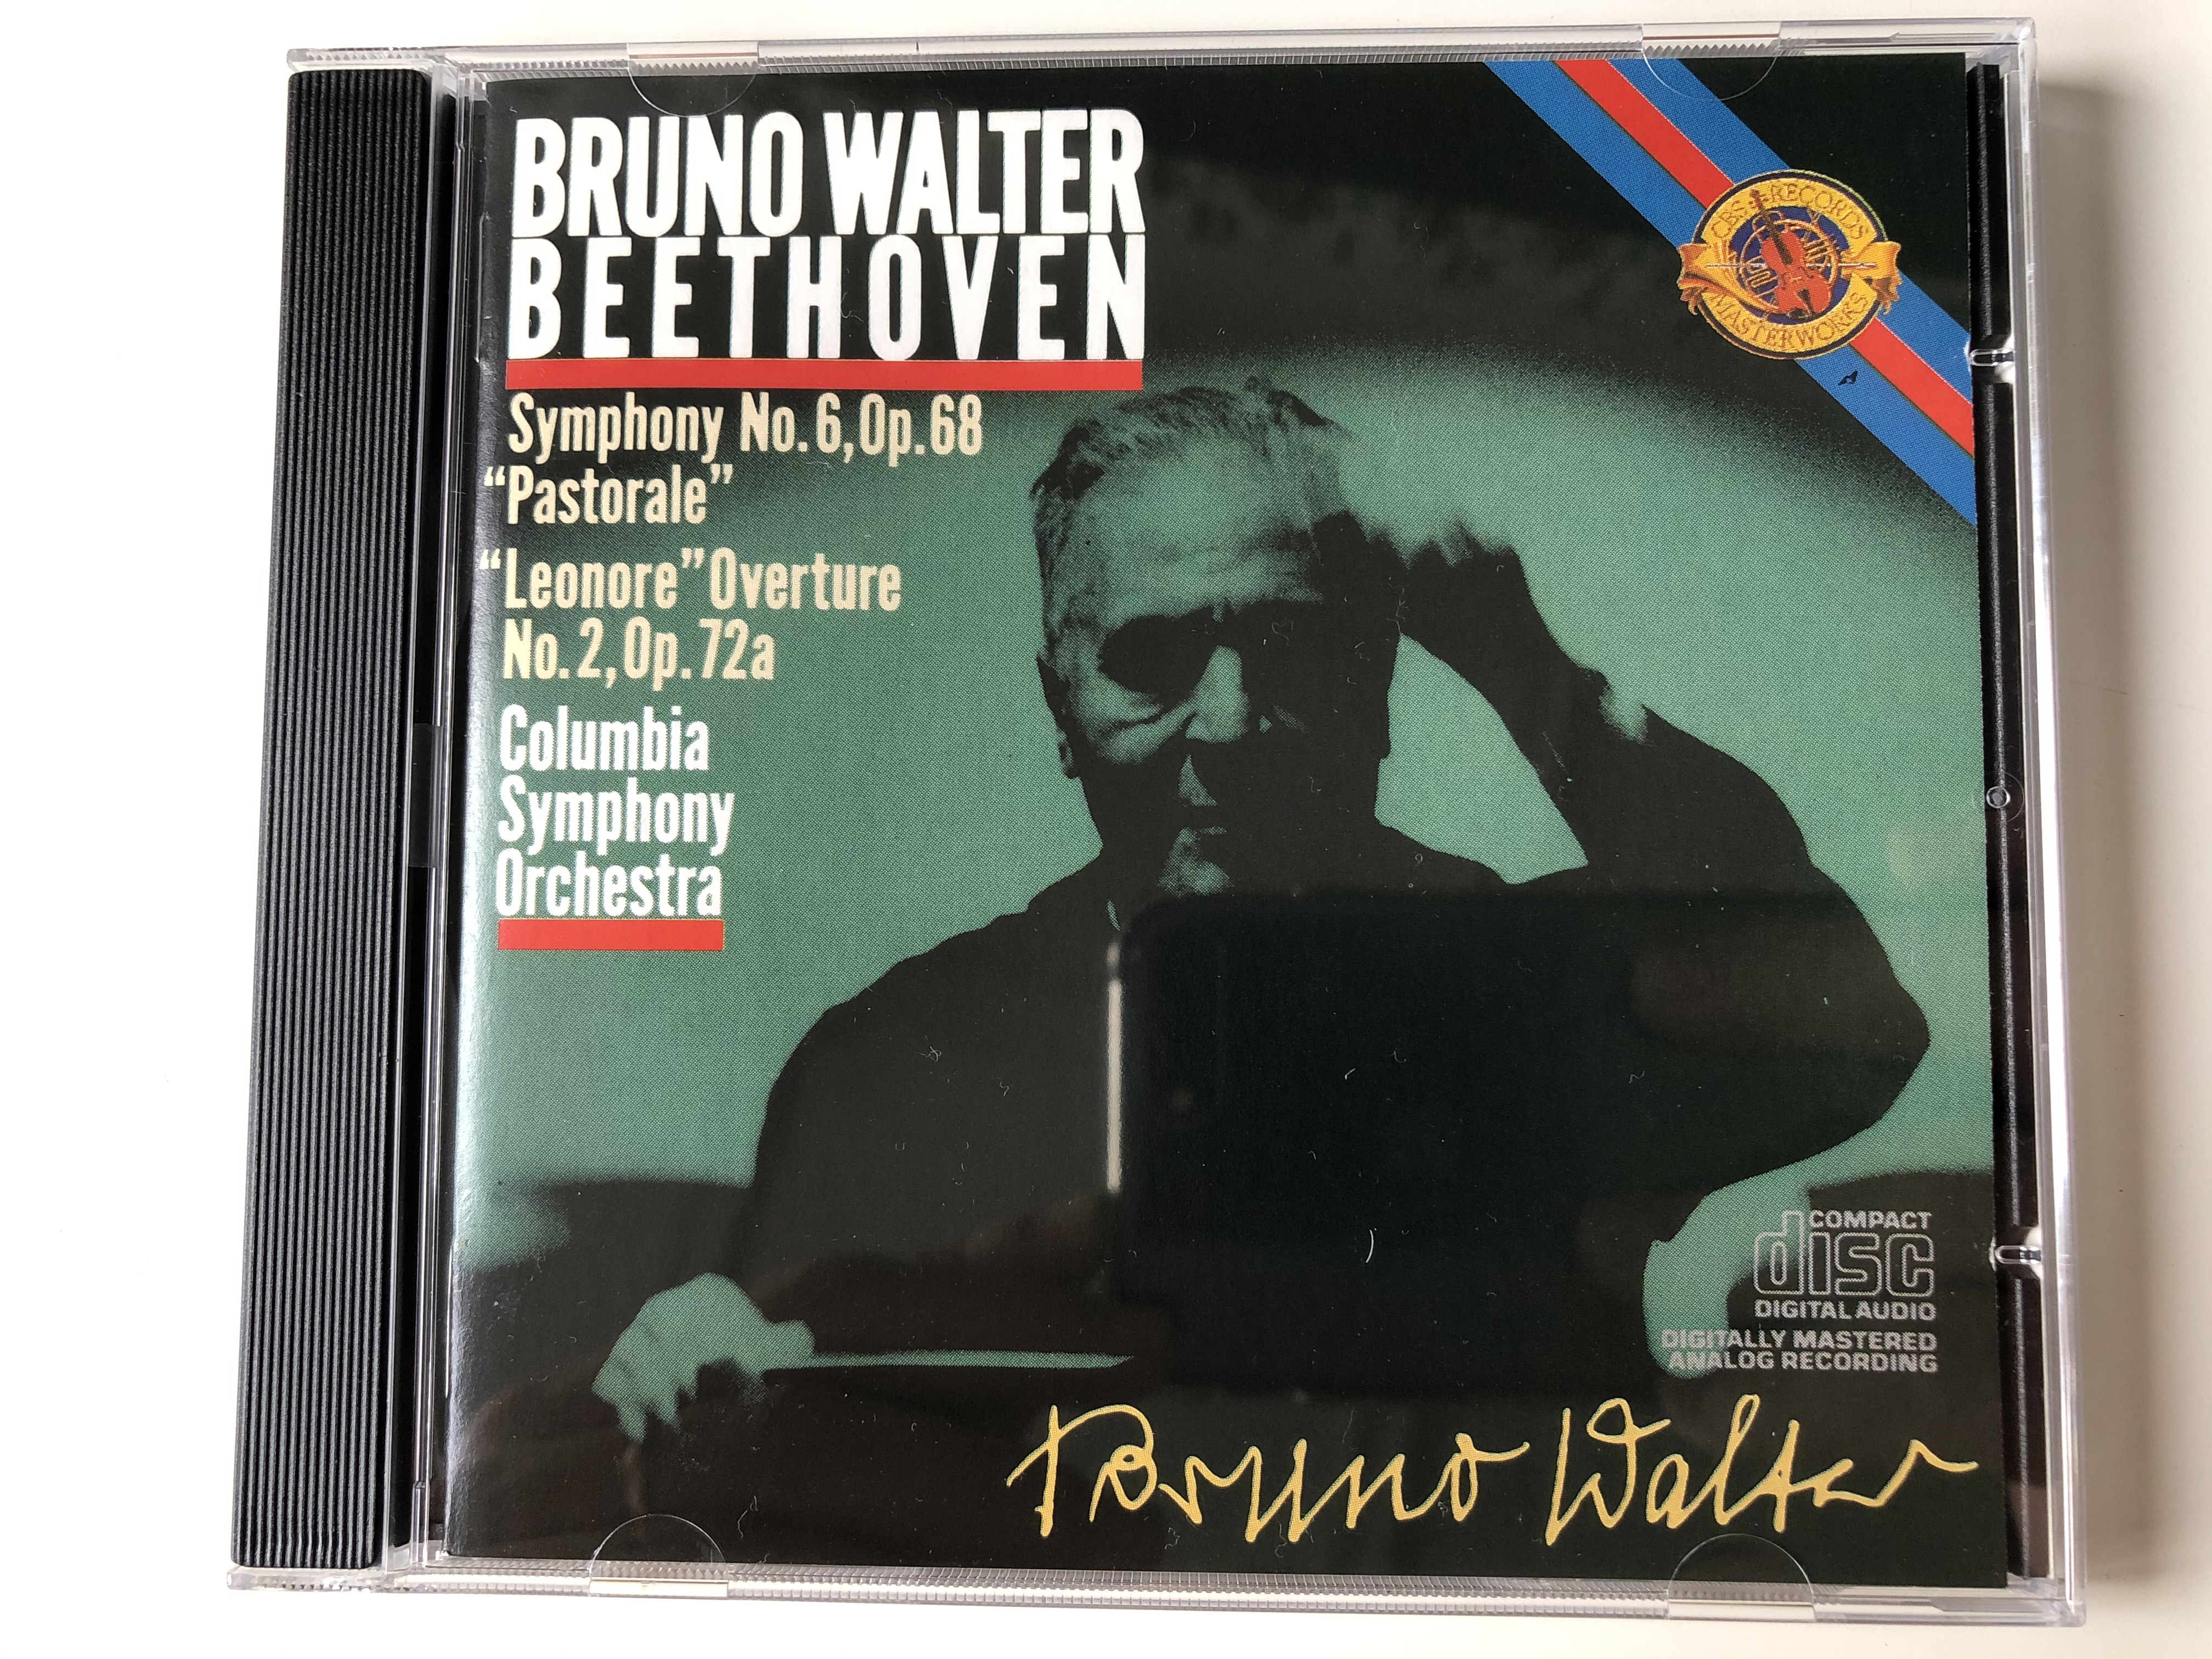 bruno-walter-beethoven-symphony-no.-6-op.68-pastorale-lenore-overture-no.2-op.-72a-columbia-symphony-orchestra-cbs-masterworks-audio-cd-1985-mk-42012-1-.jpg